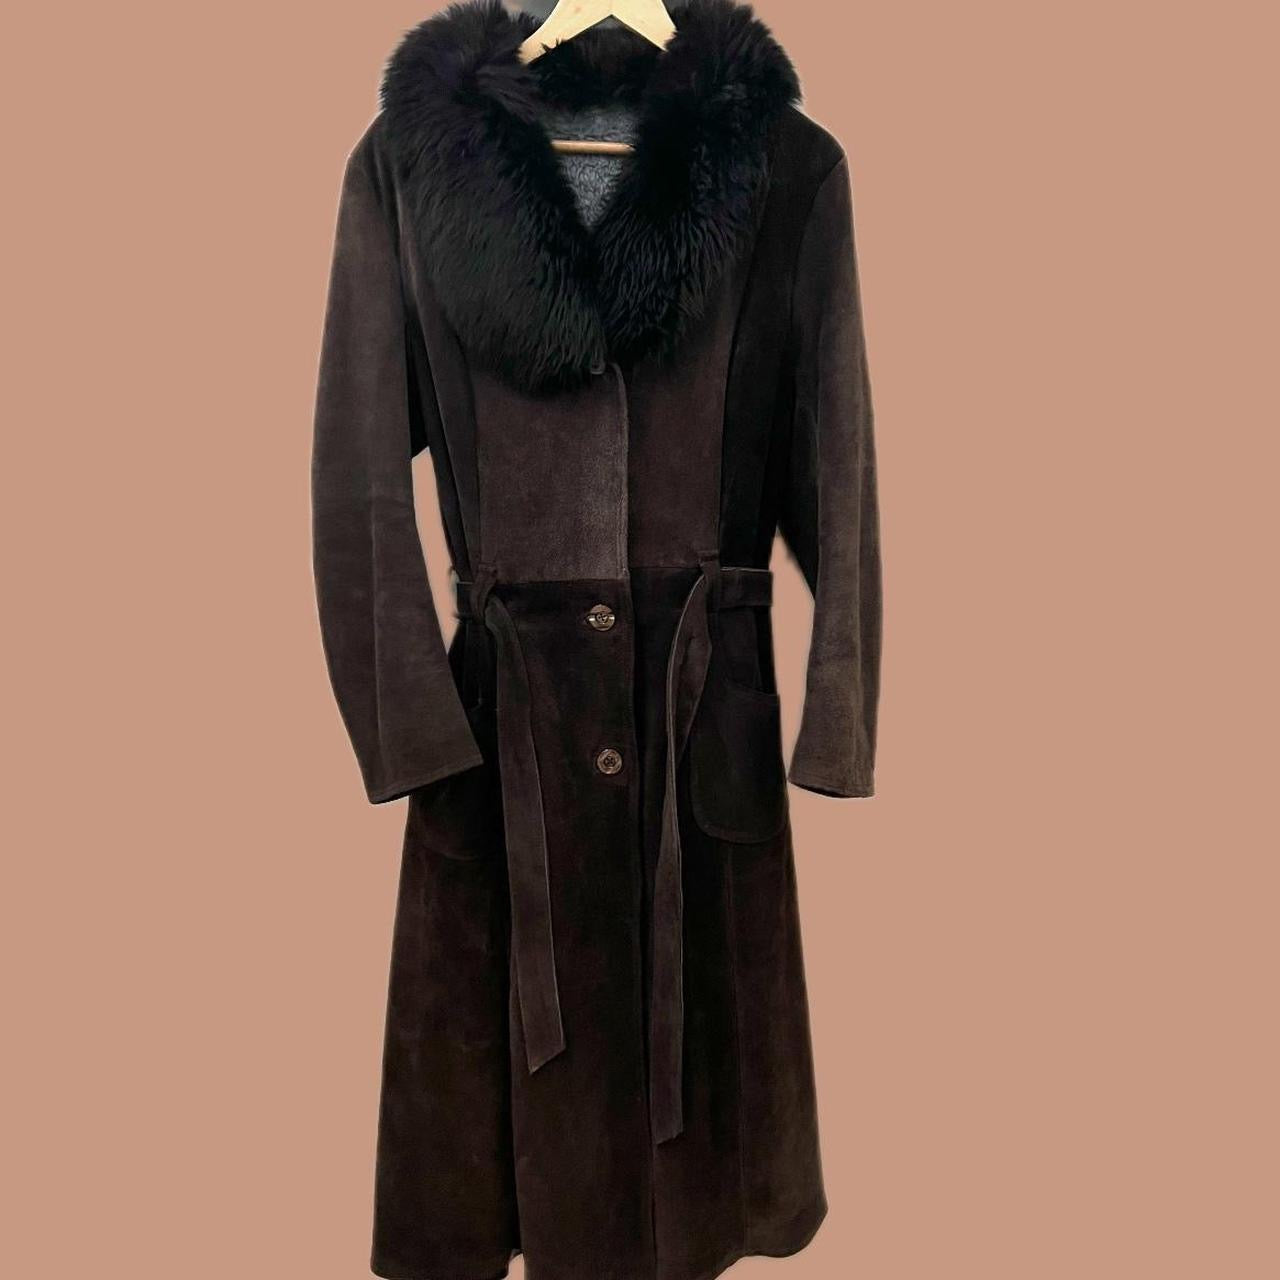 1970s shearling suede coat